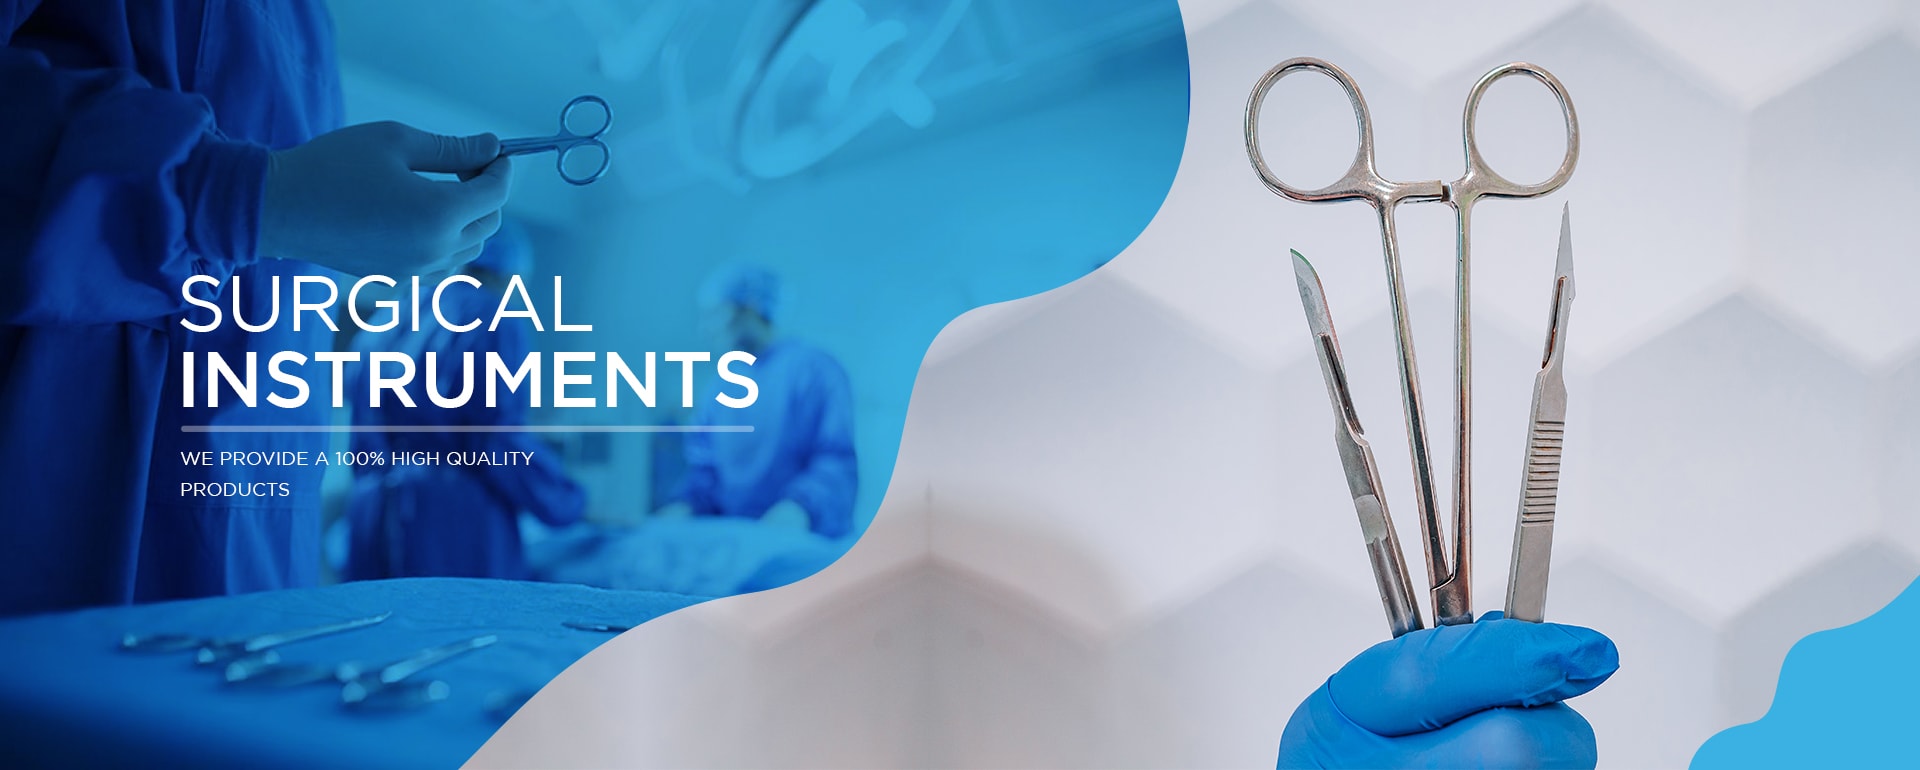 Surgical instruments banner-min